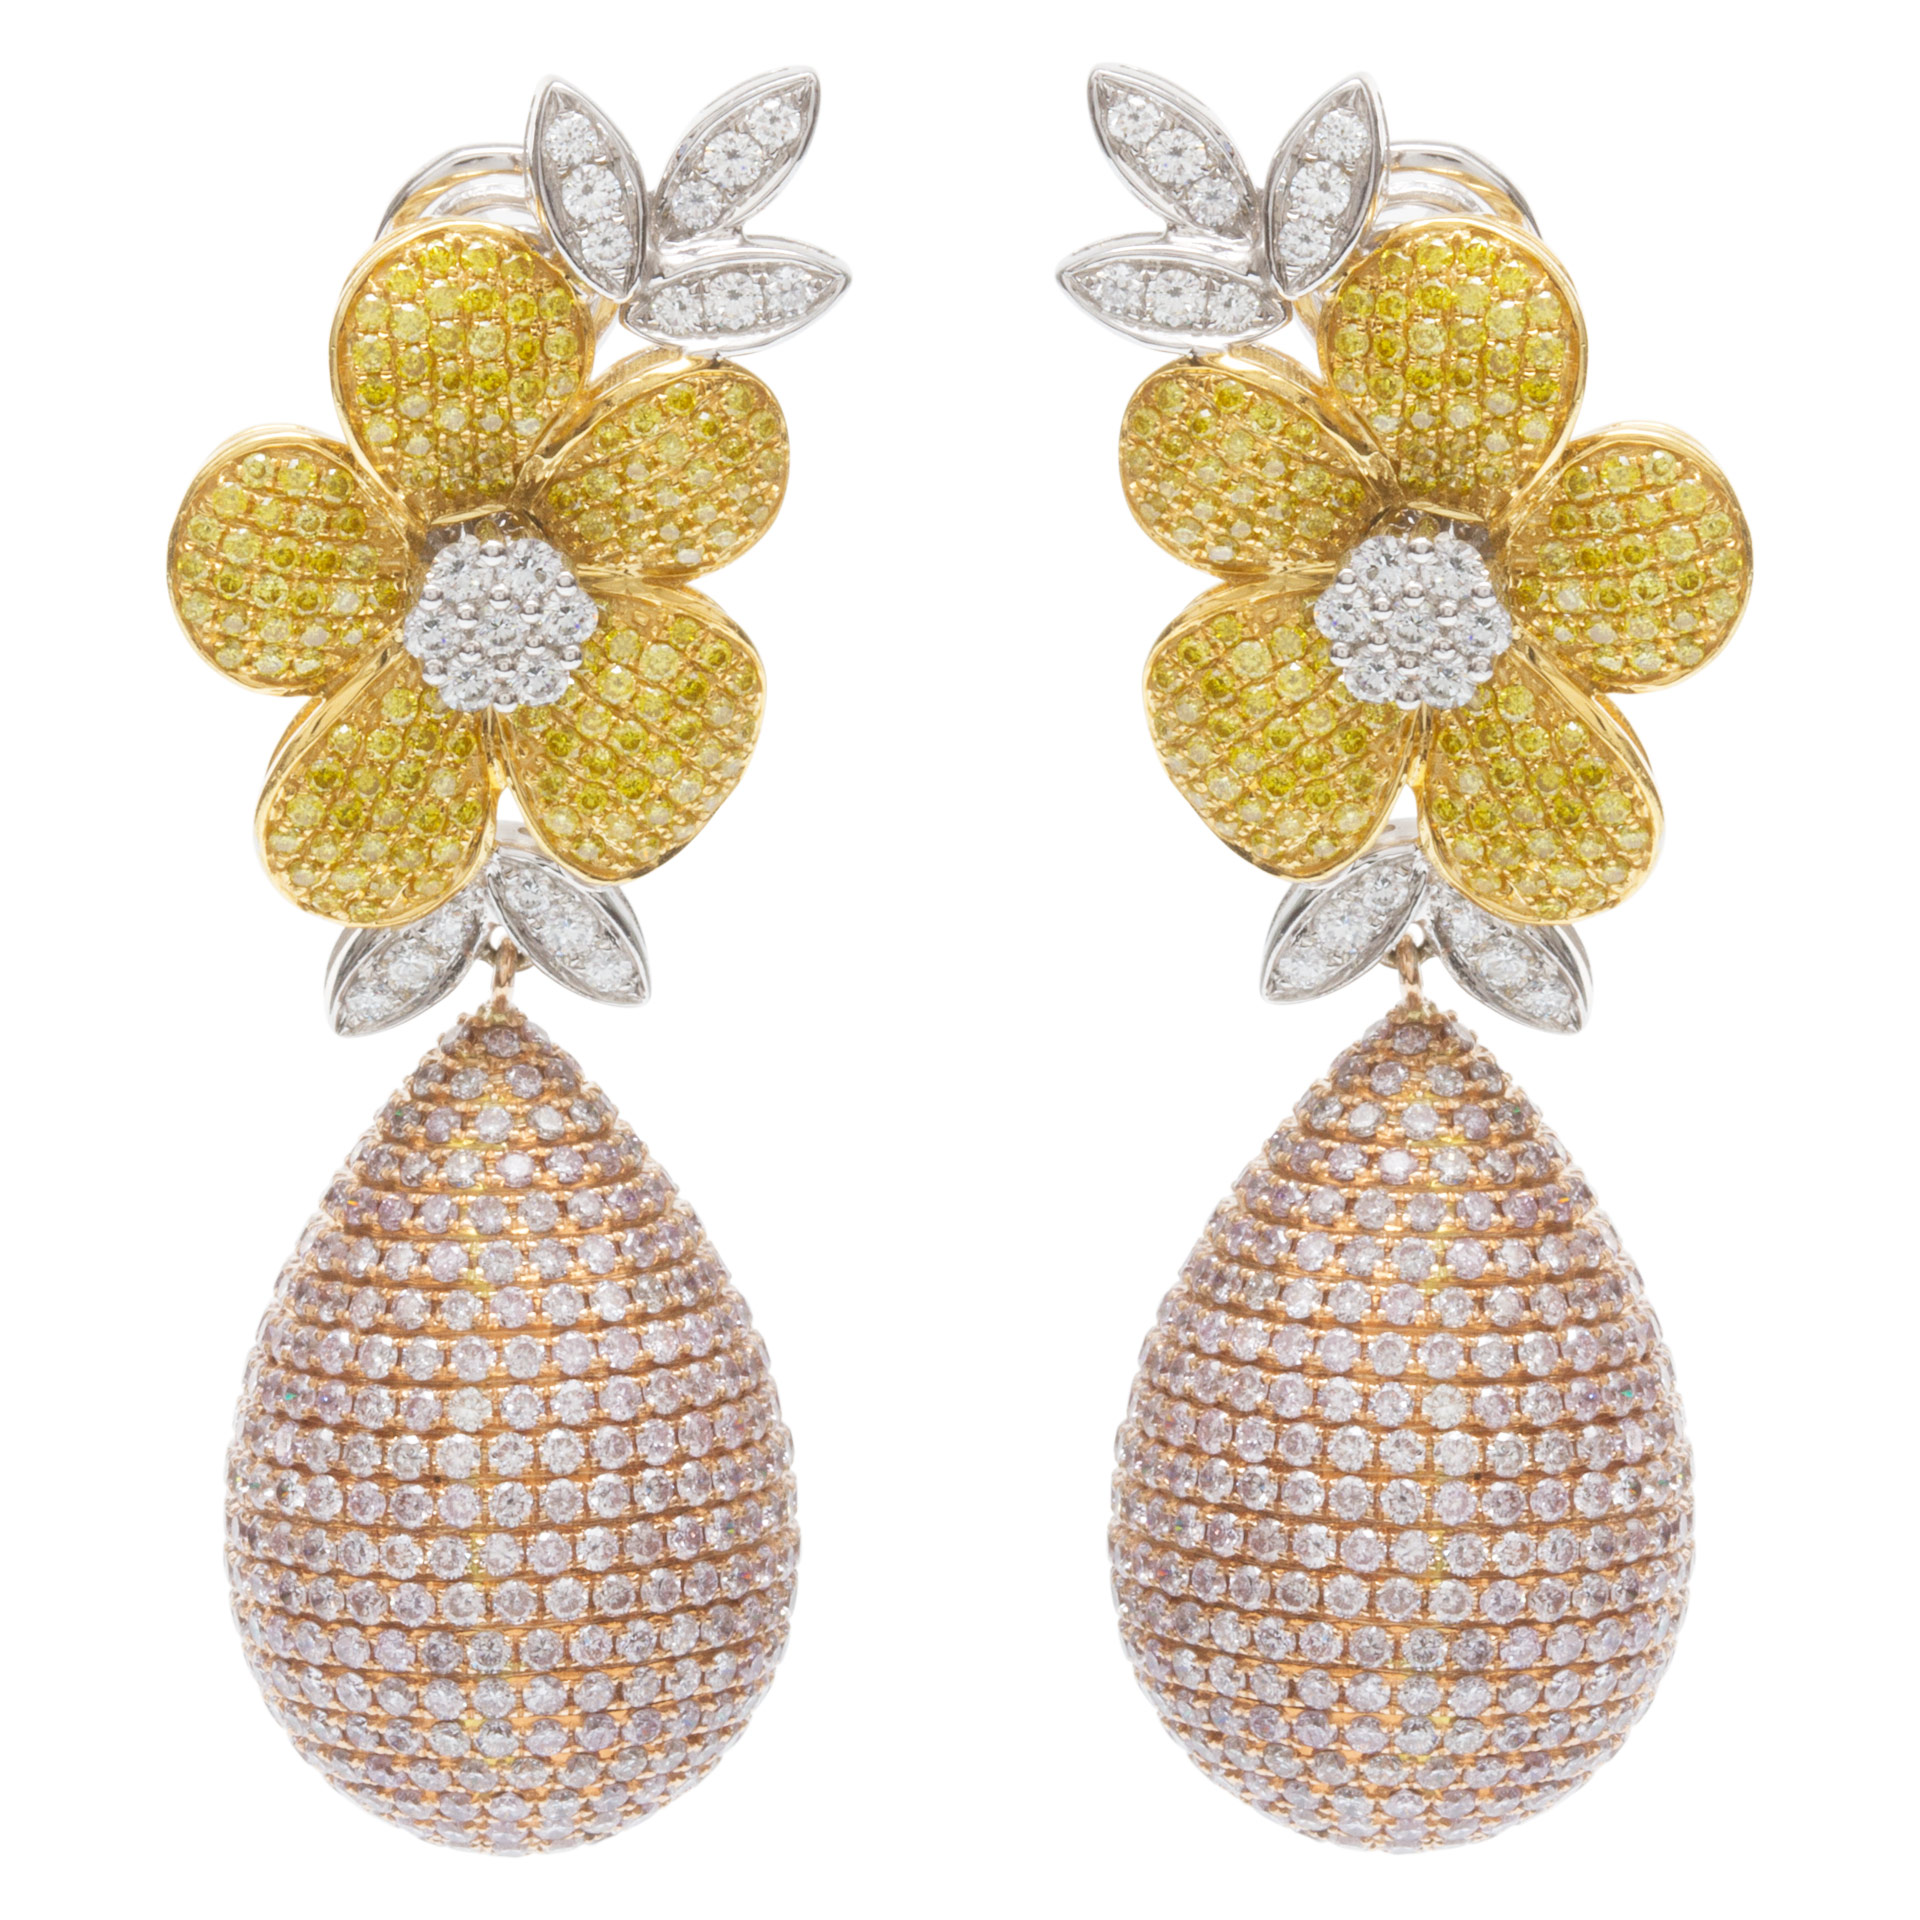 Glamorous flower diamond earrings with approx. 13. 50 carats white, natural pink & brown/yellow diamonds set in 18K tri-color gold.